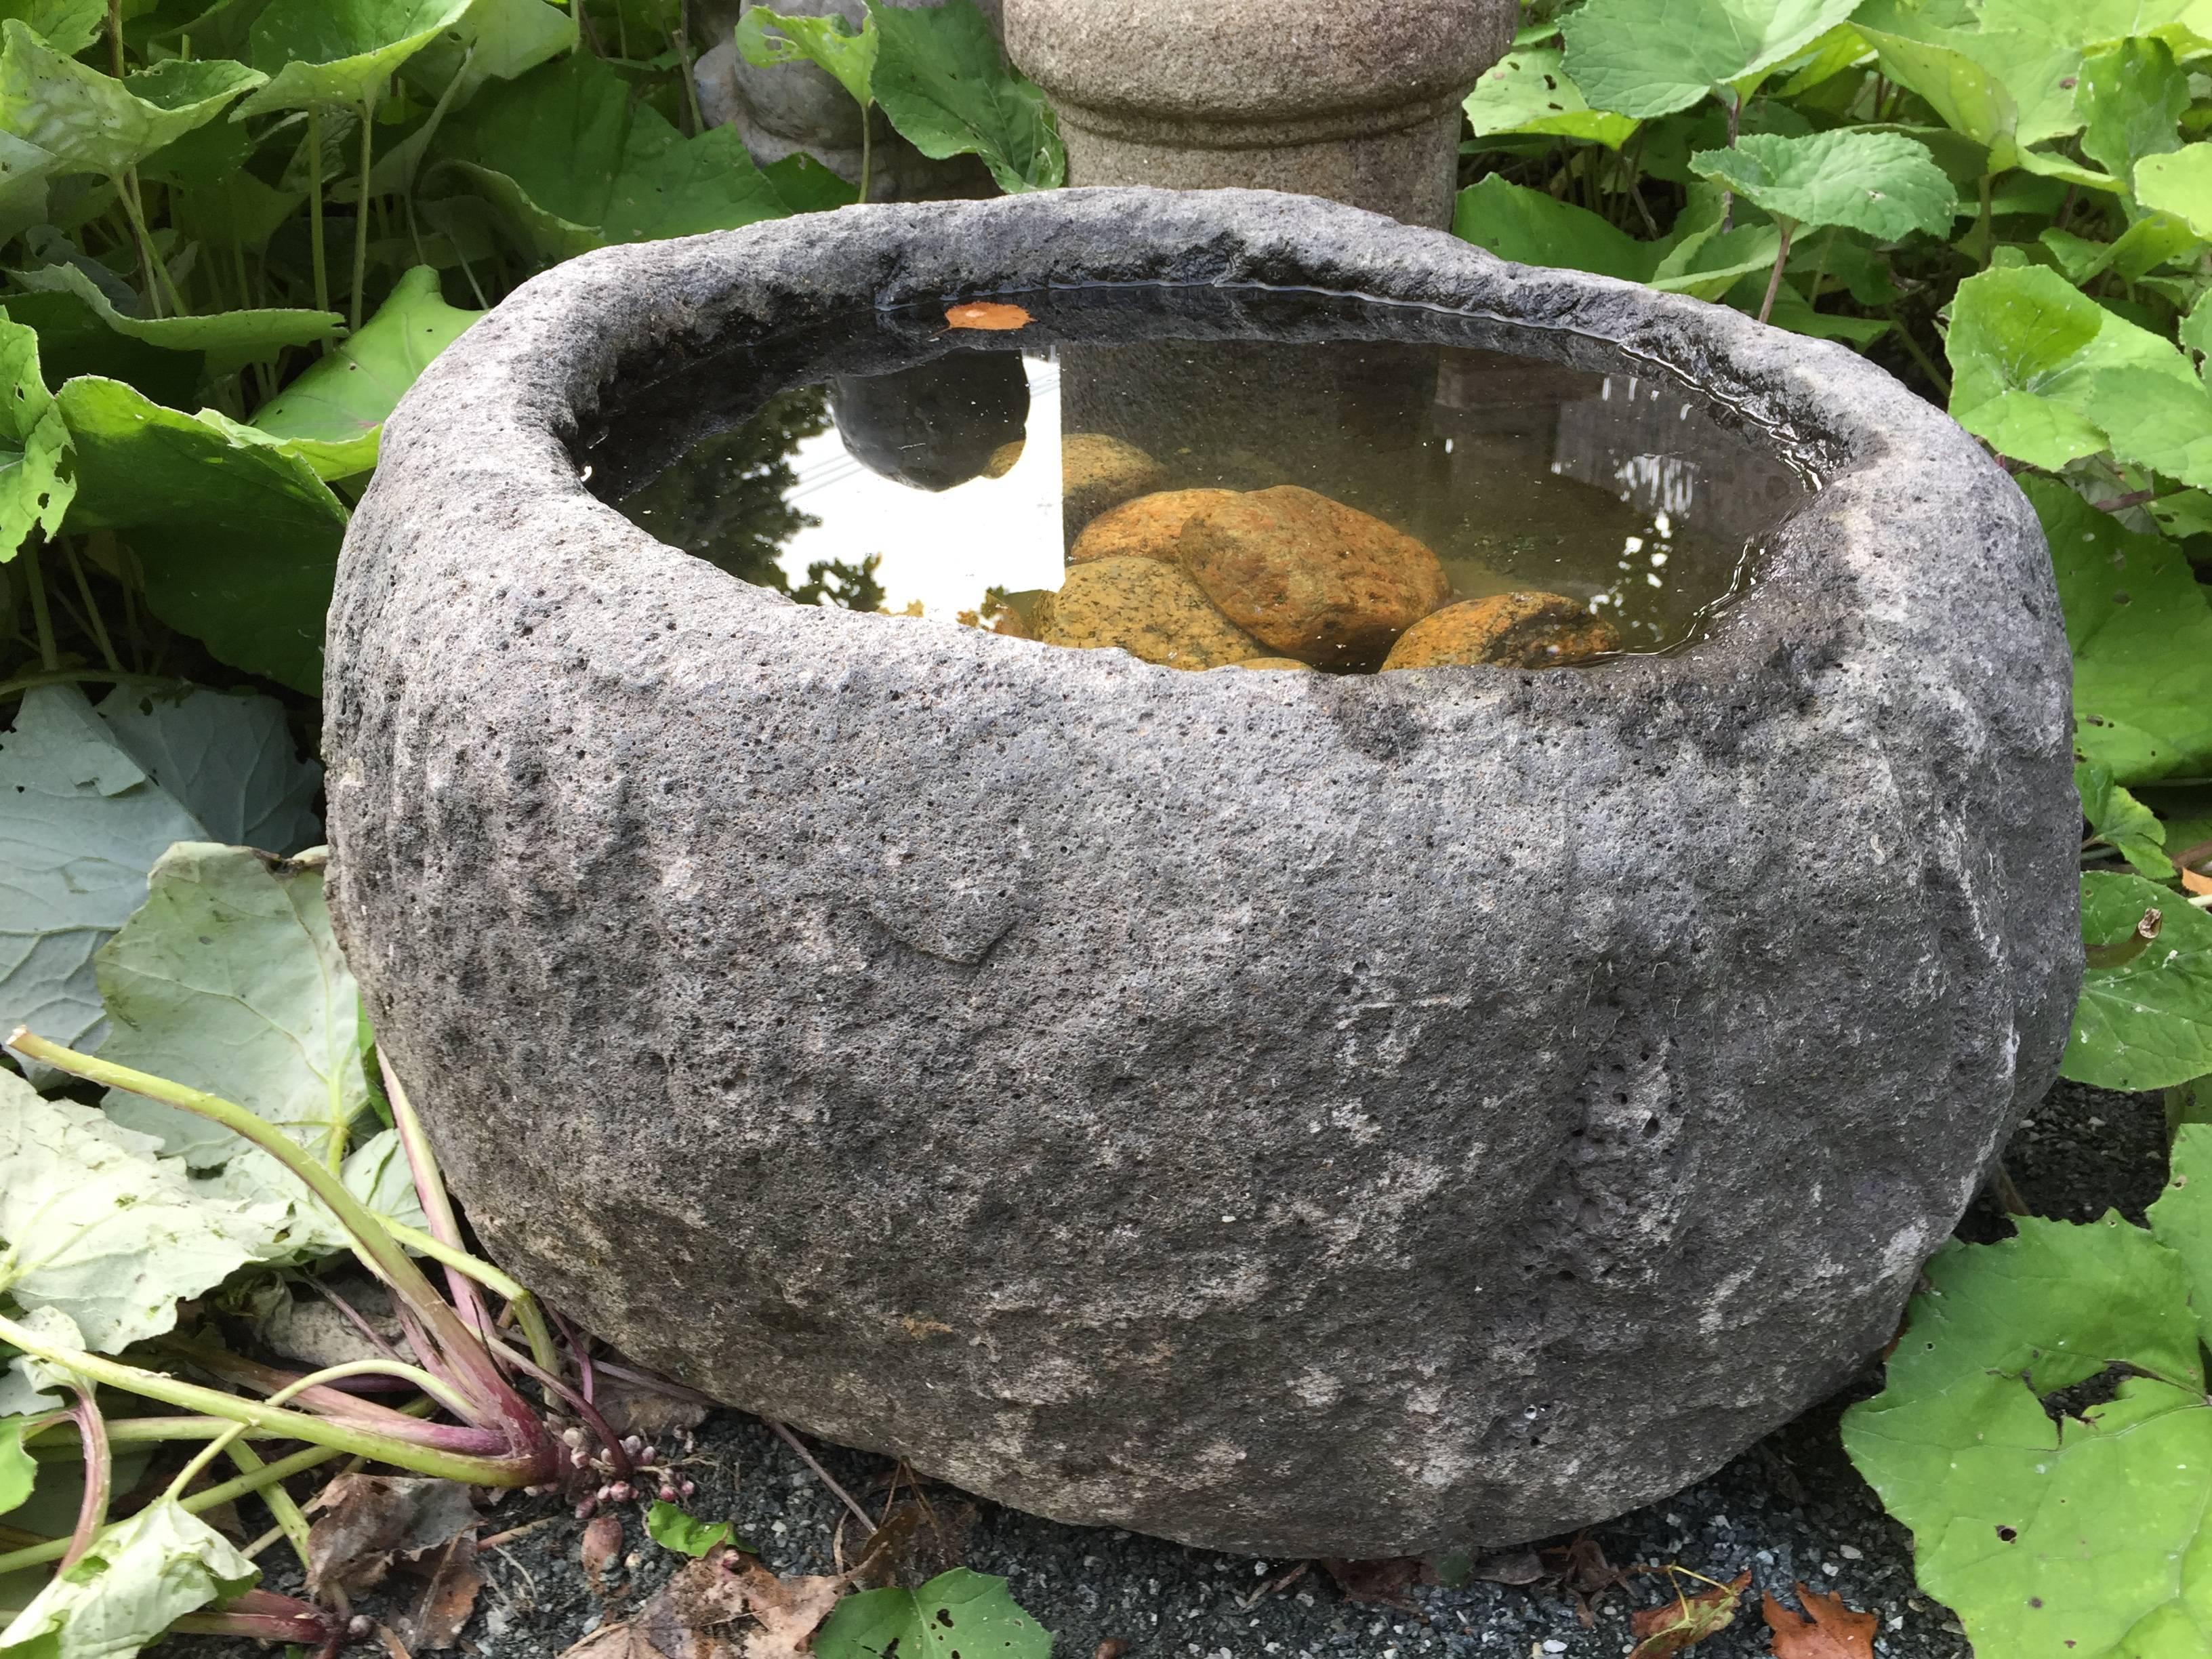 A fine old Antique Japanese  medium sized old pumpkin shaped solid planter or water basin, hand-carved from solid stone, 19th century.

Dimensions: 12 inches in height and 20 inches in width and 20 inches deep

Stone water basins are singularly the